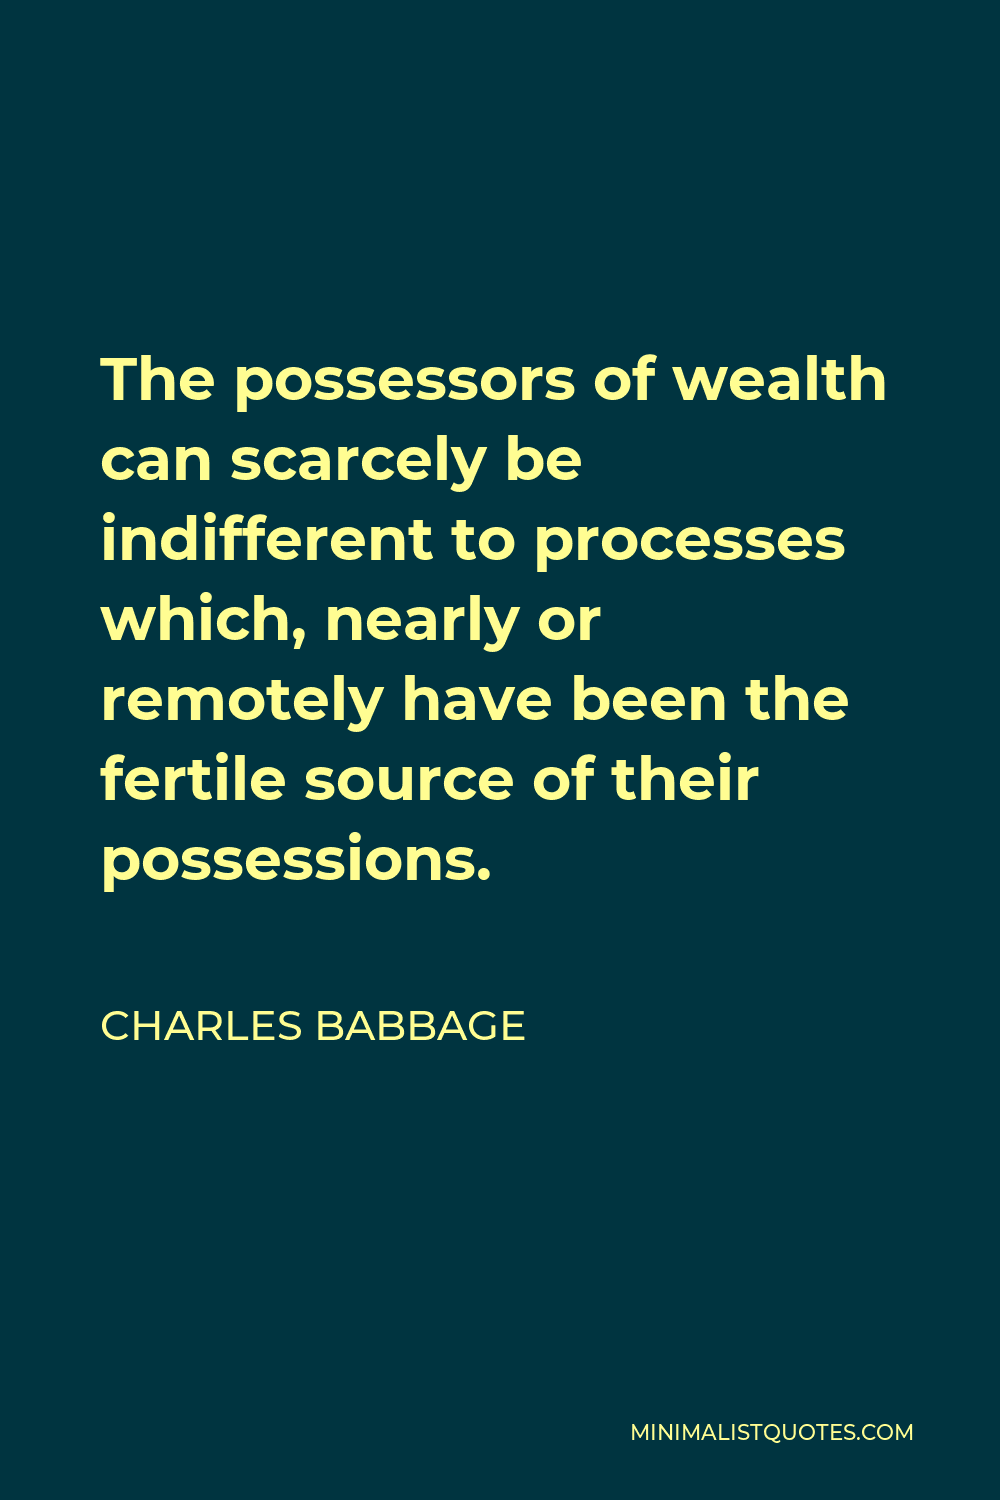 Charles Babbage Quote - The possessors of wealth can scarcely be indifferent to processes which, nearly or remotely have been the fertile source of their possessions.